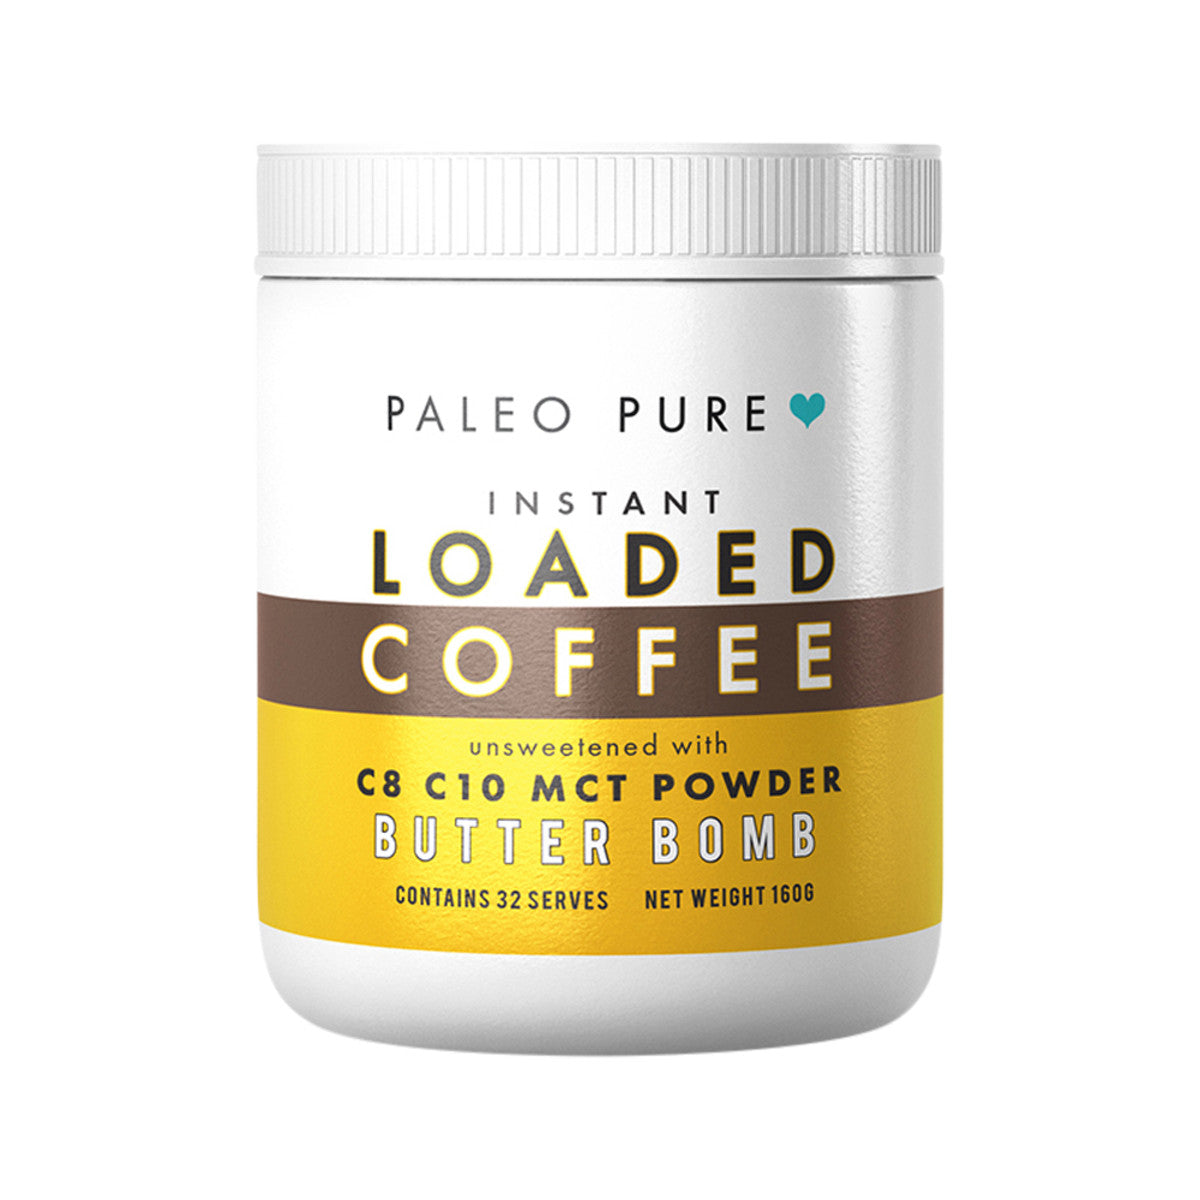 Paleo Pure Instant Loaded Coffee Unsweetened with C8 C10 MCT Powder 160g, Butter Bomb Flavour